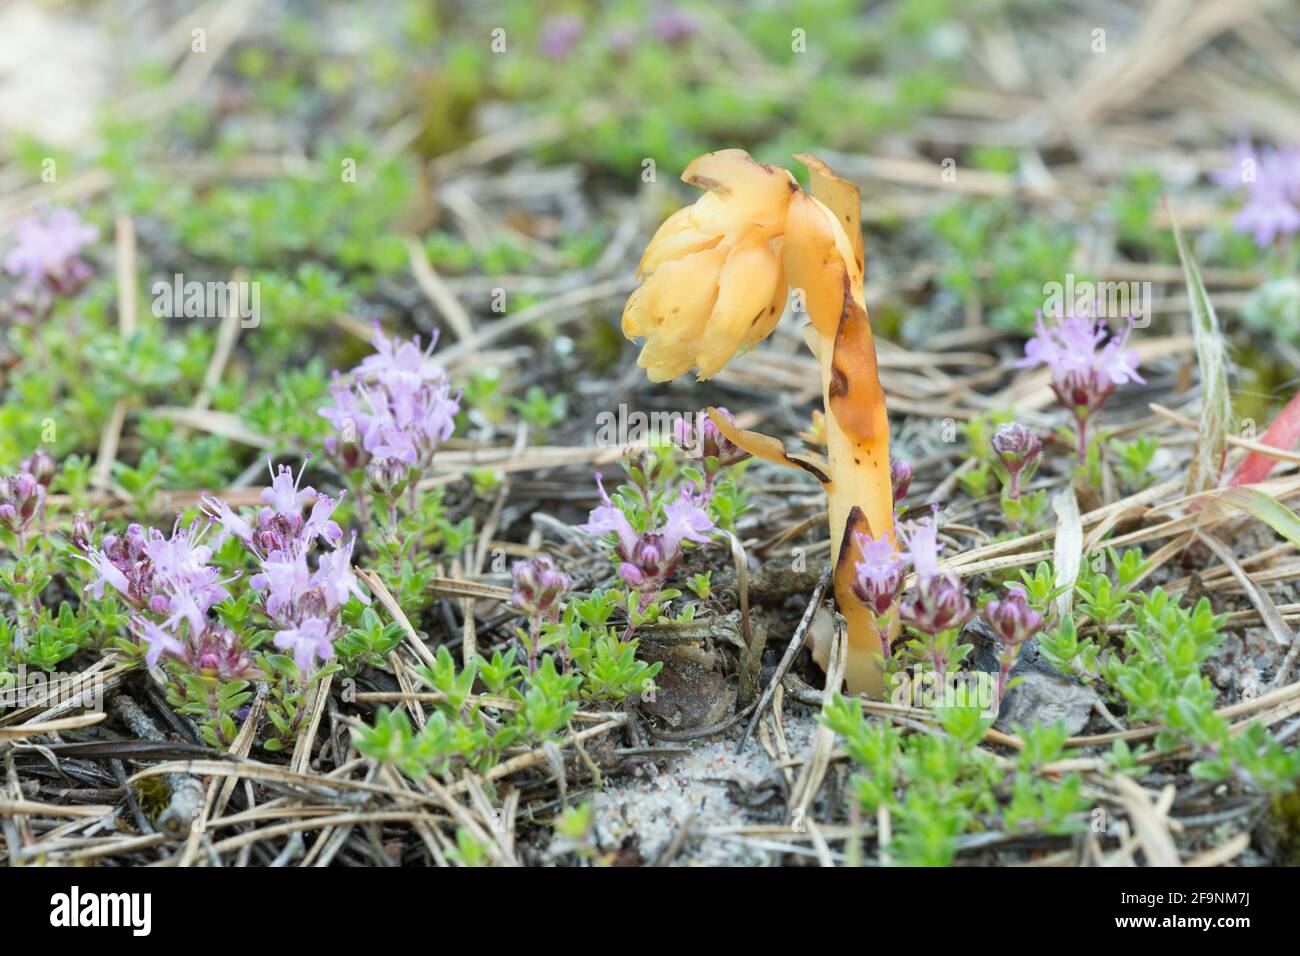 Dutchman's pipe, Monotropa hypopitys growing among breckland thyme, Thymus serpyllum in dry environment Stock Photo